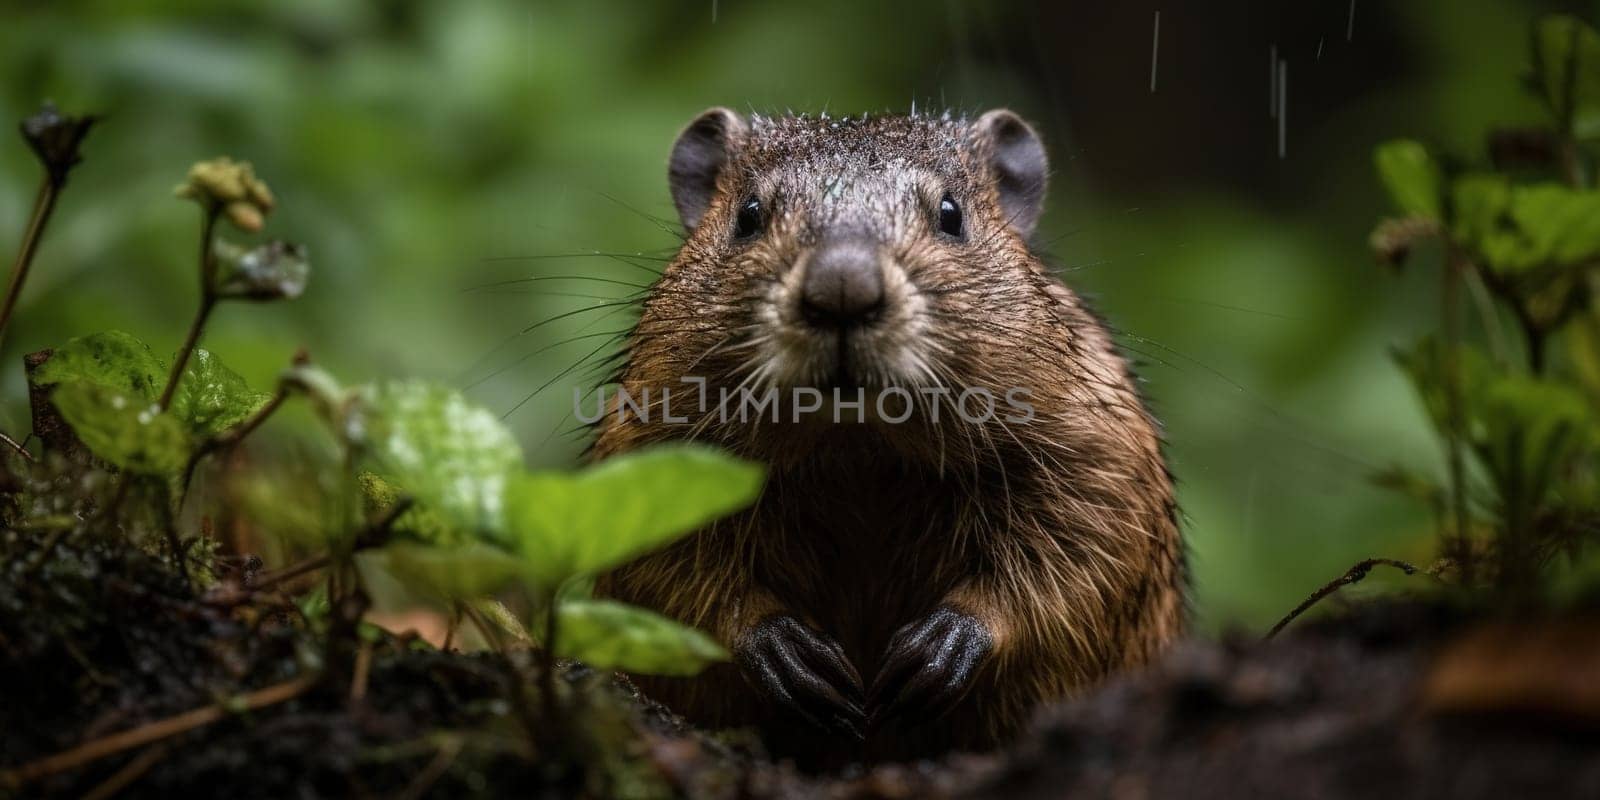 Wild Hamster In The Forest In The Rain by tan4ikk1